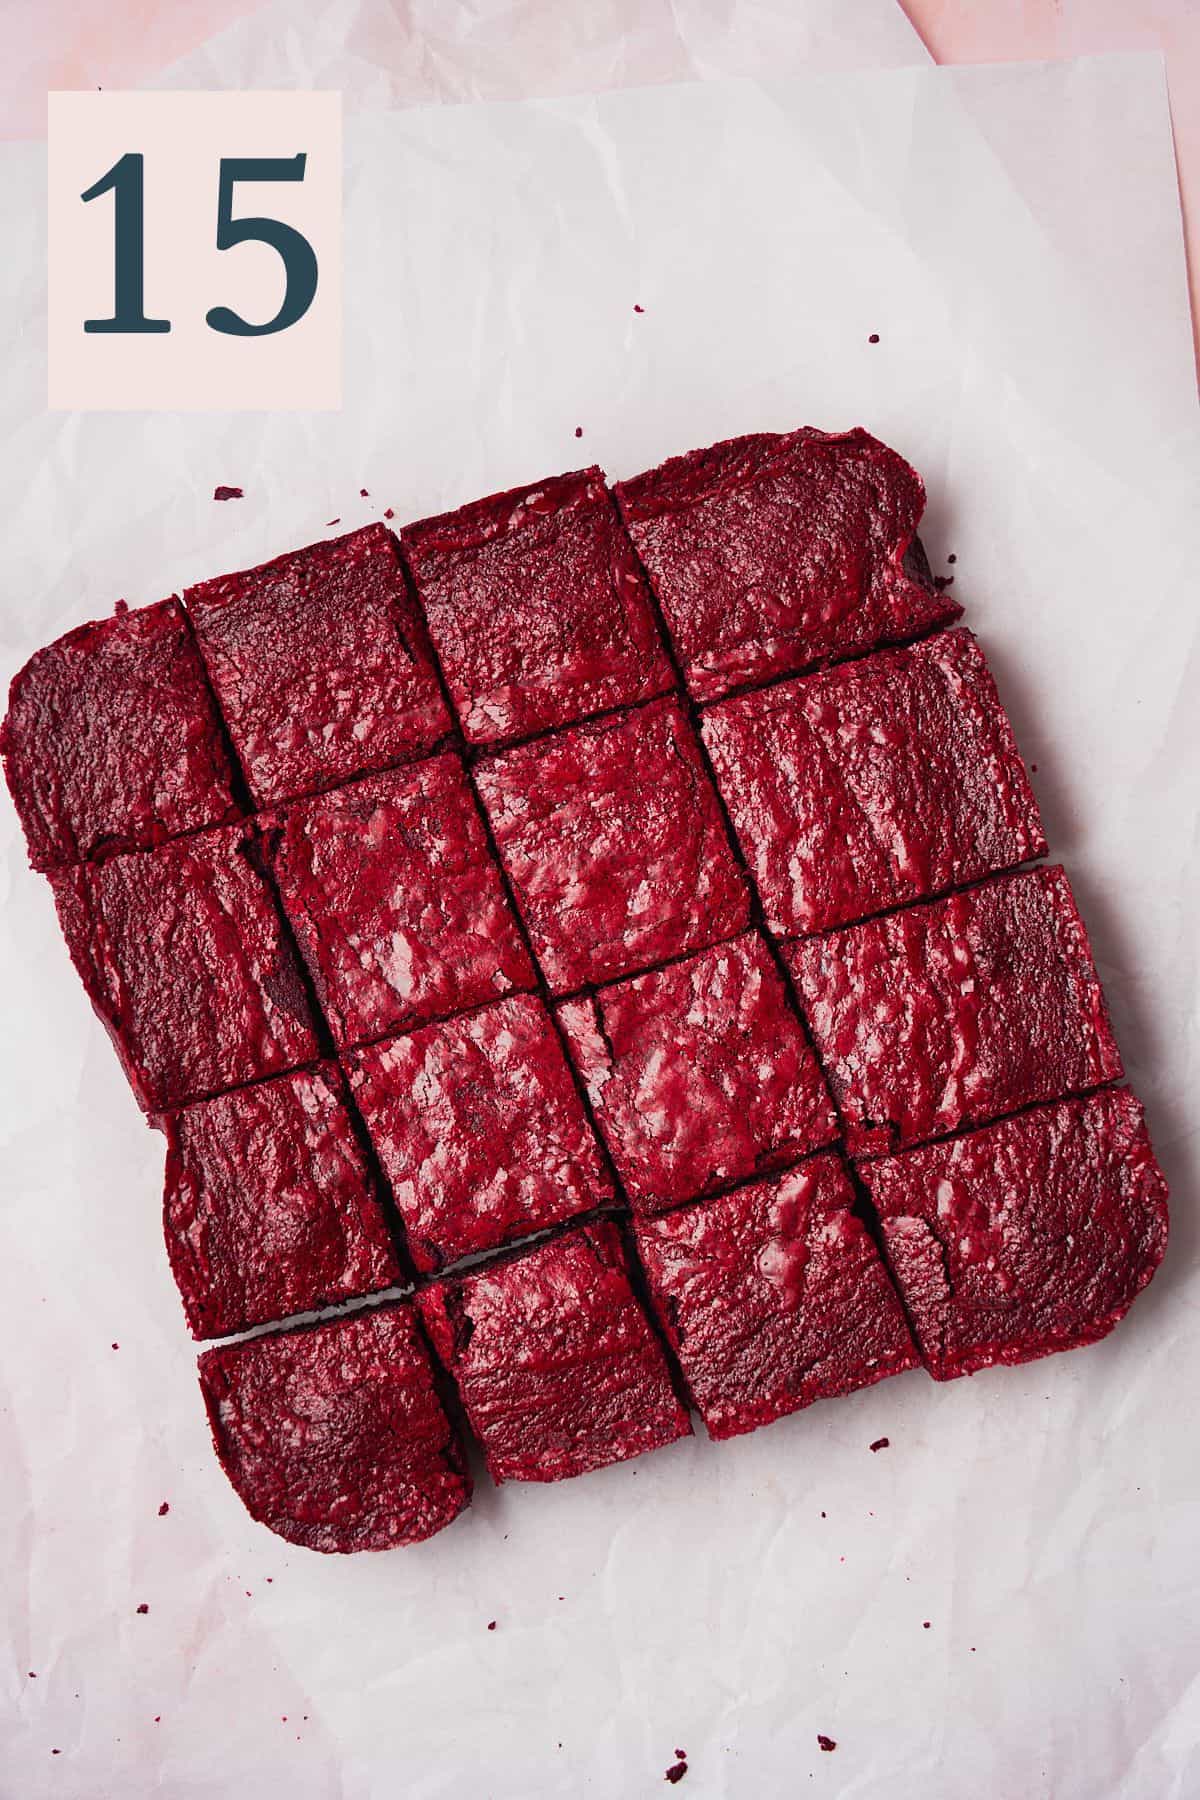 Red velvet brownies cut into 16 square pieces on crinkled white parchment paper. 